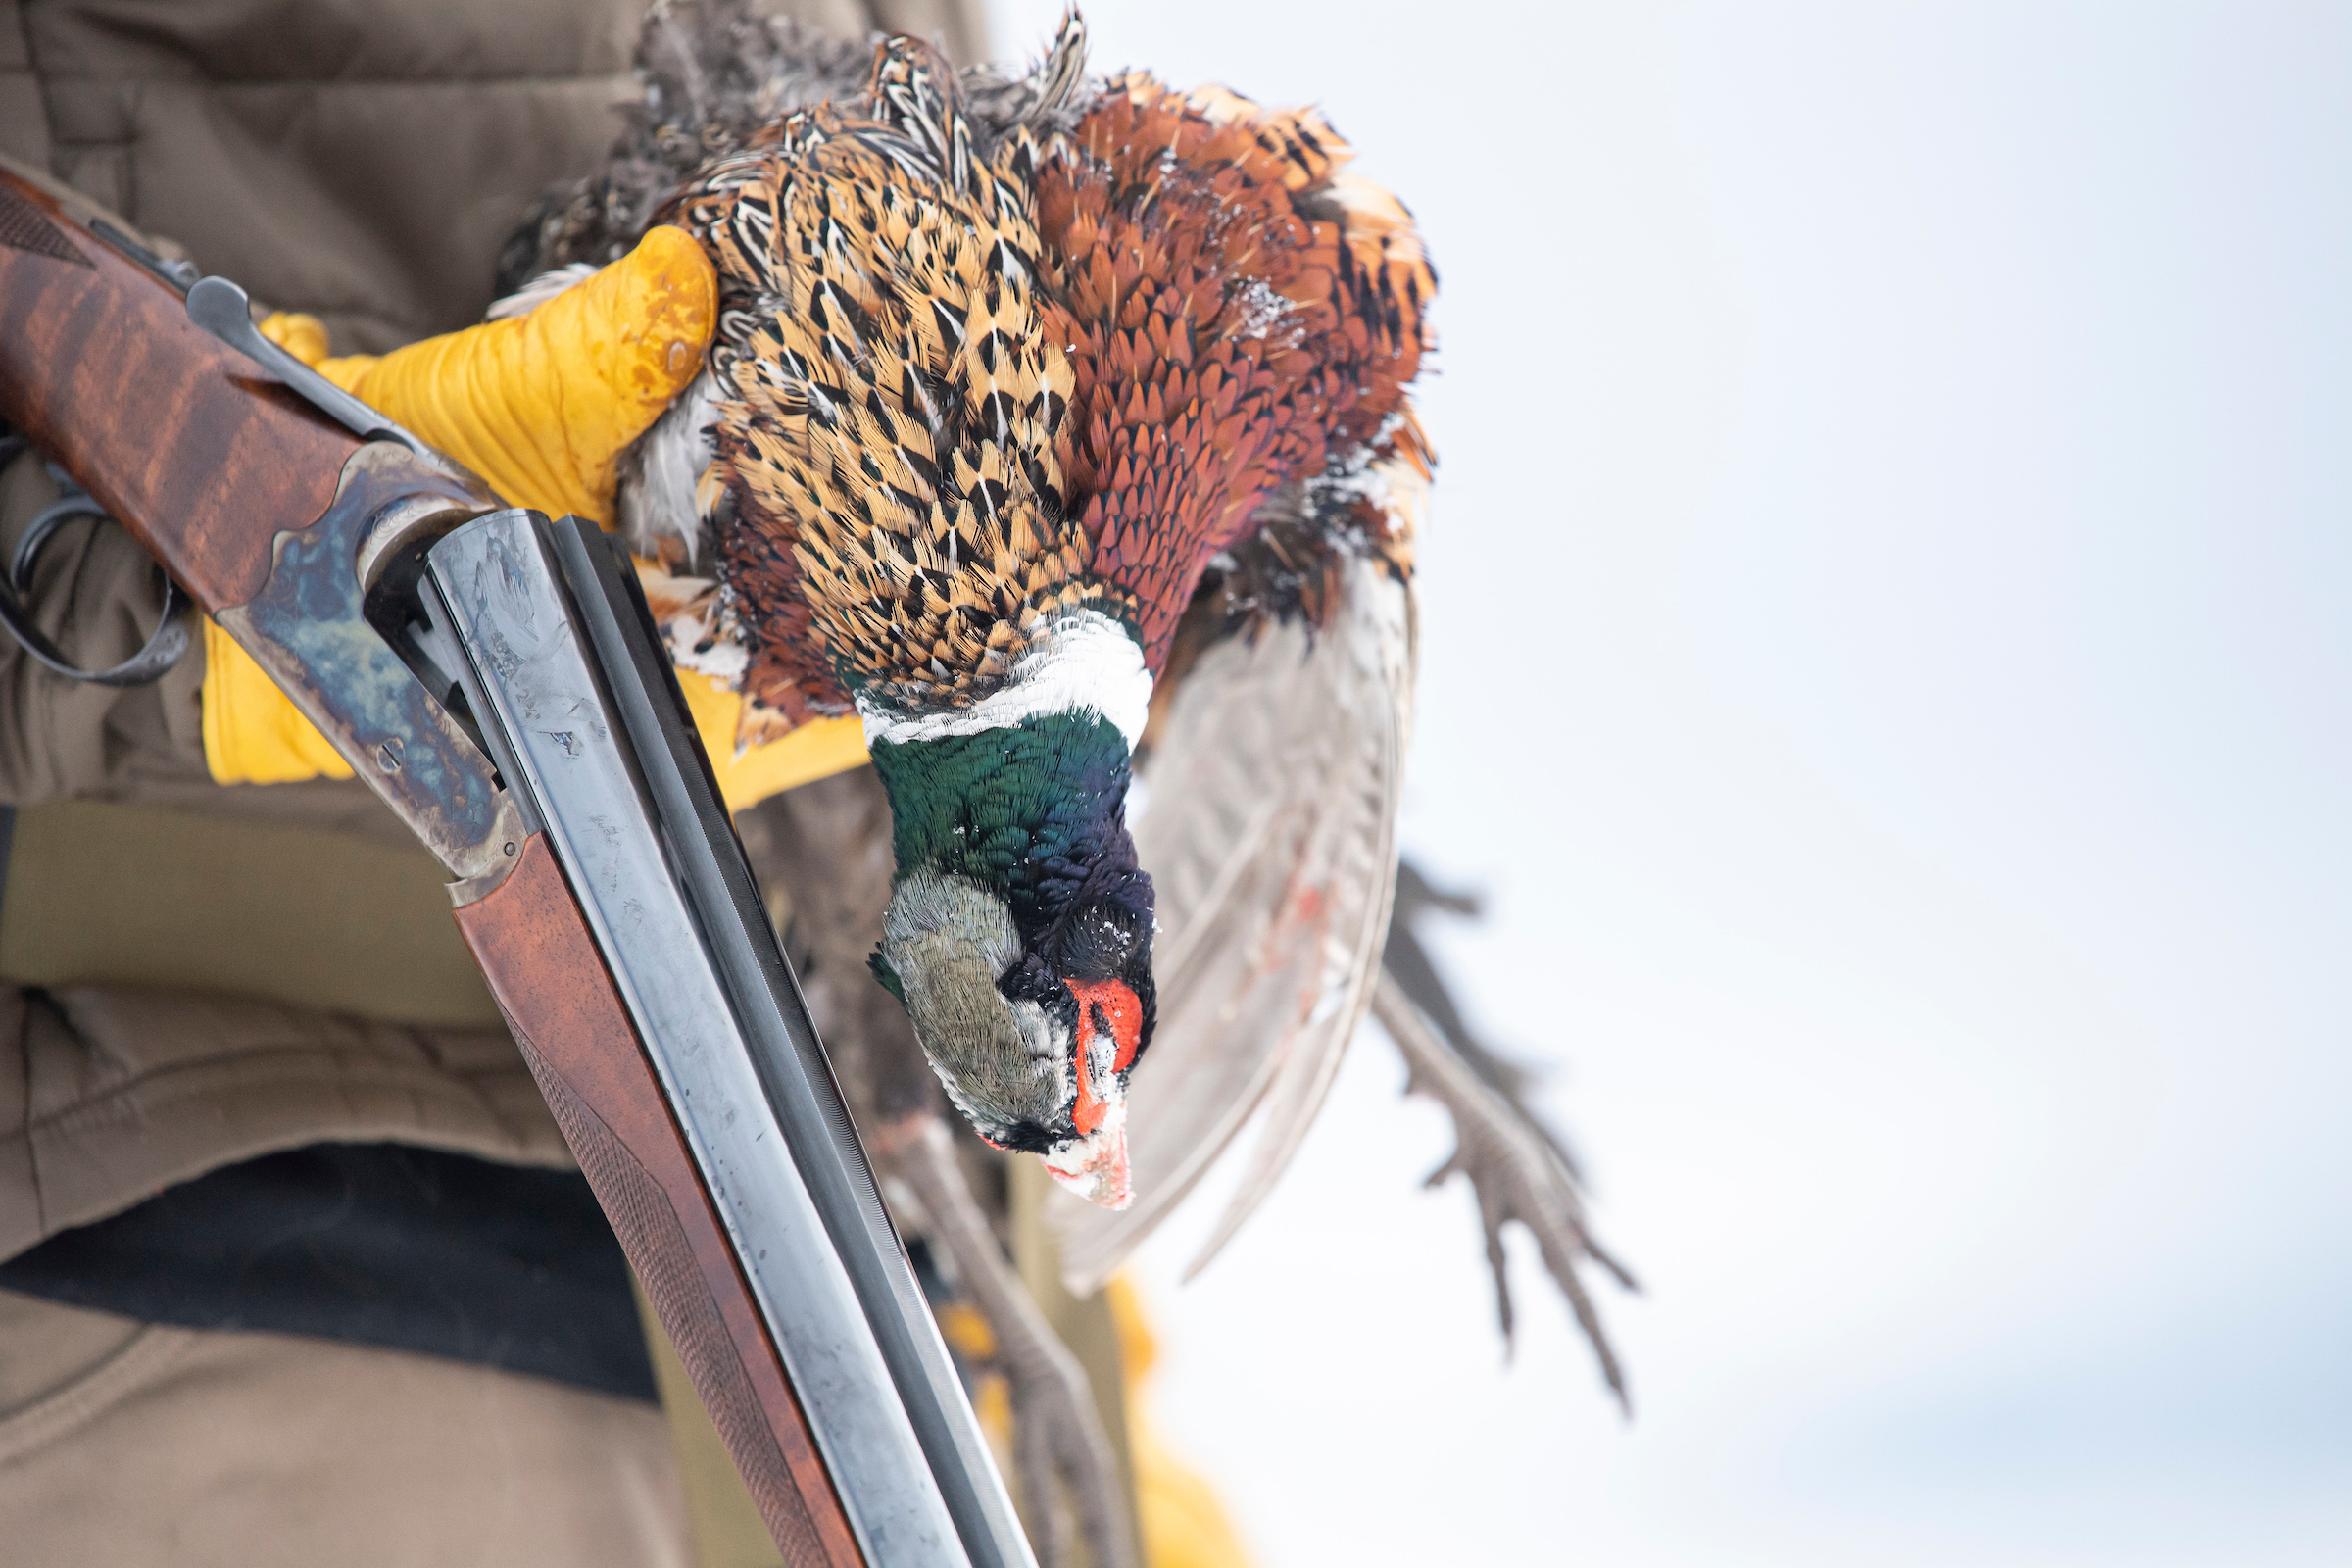 Will Russia's Invasion of Ukraine Mean Fewer Pheasants This Fall?